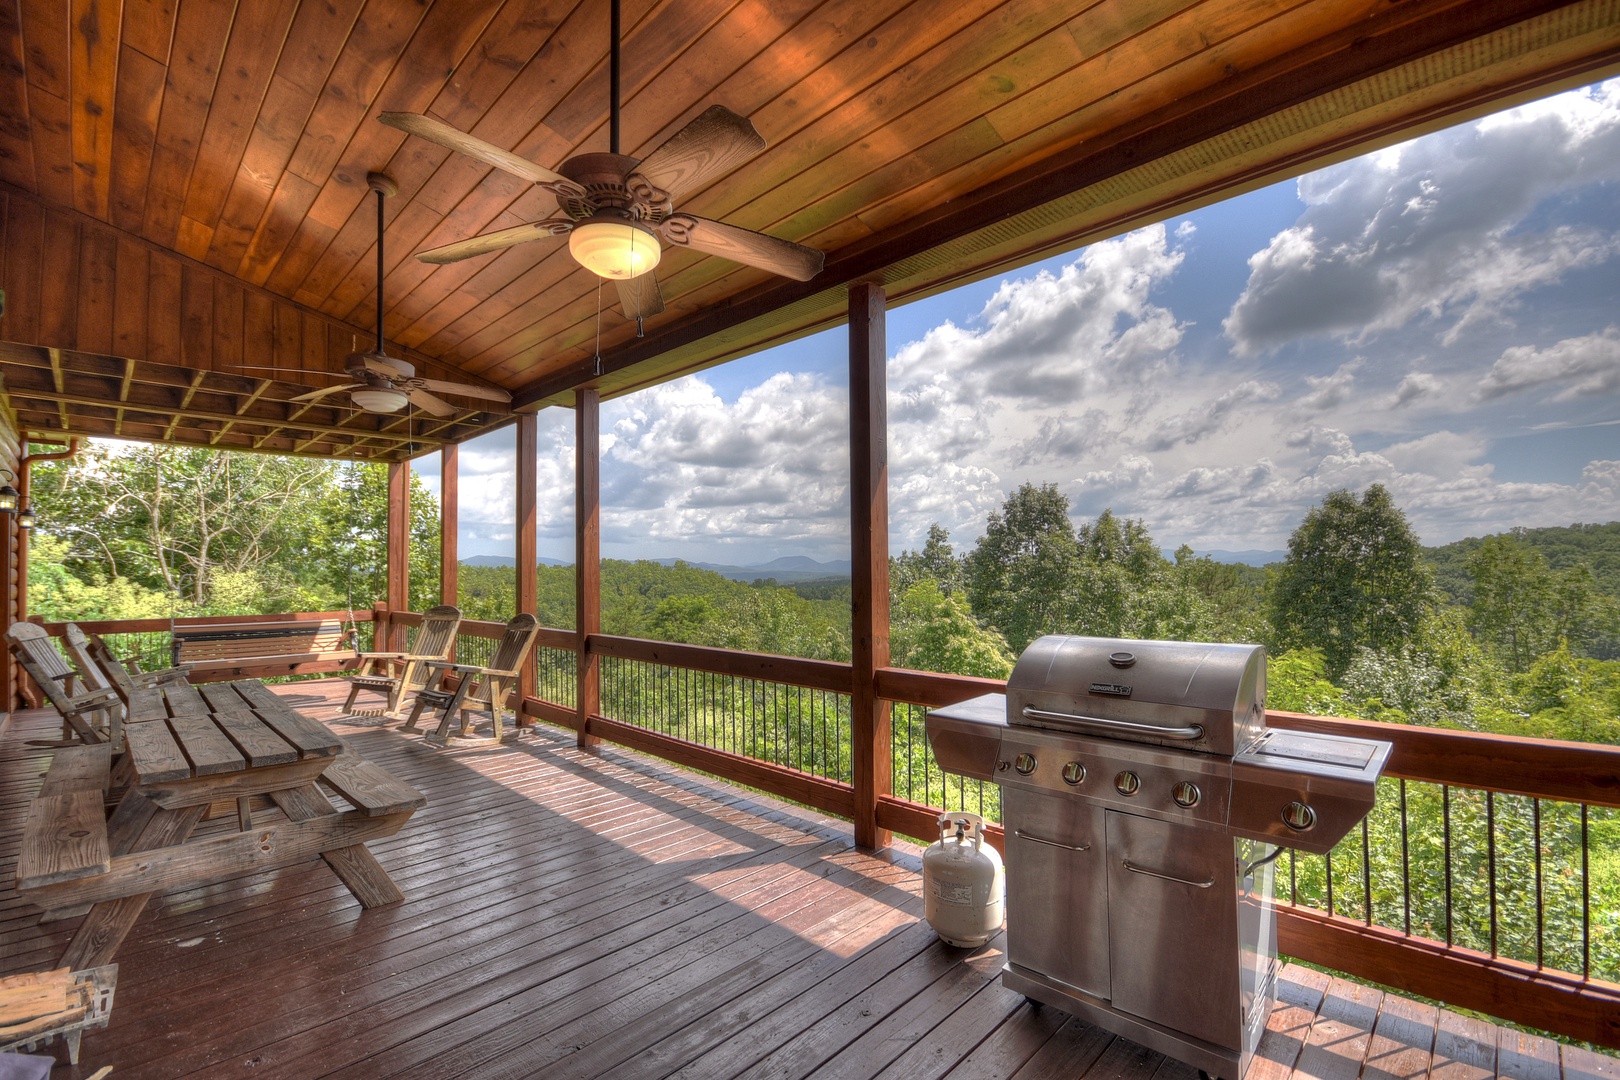 Above Ravens Ridge- Entry level deck area with a grill